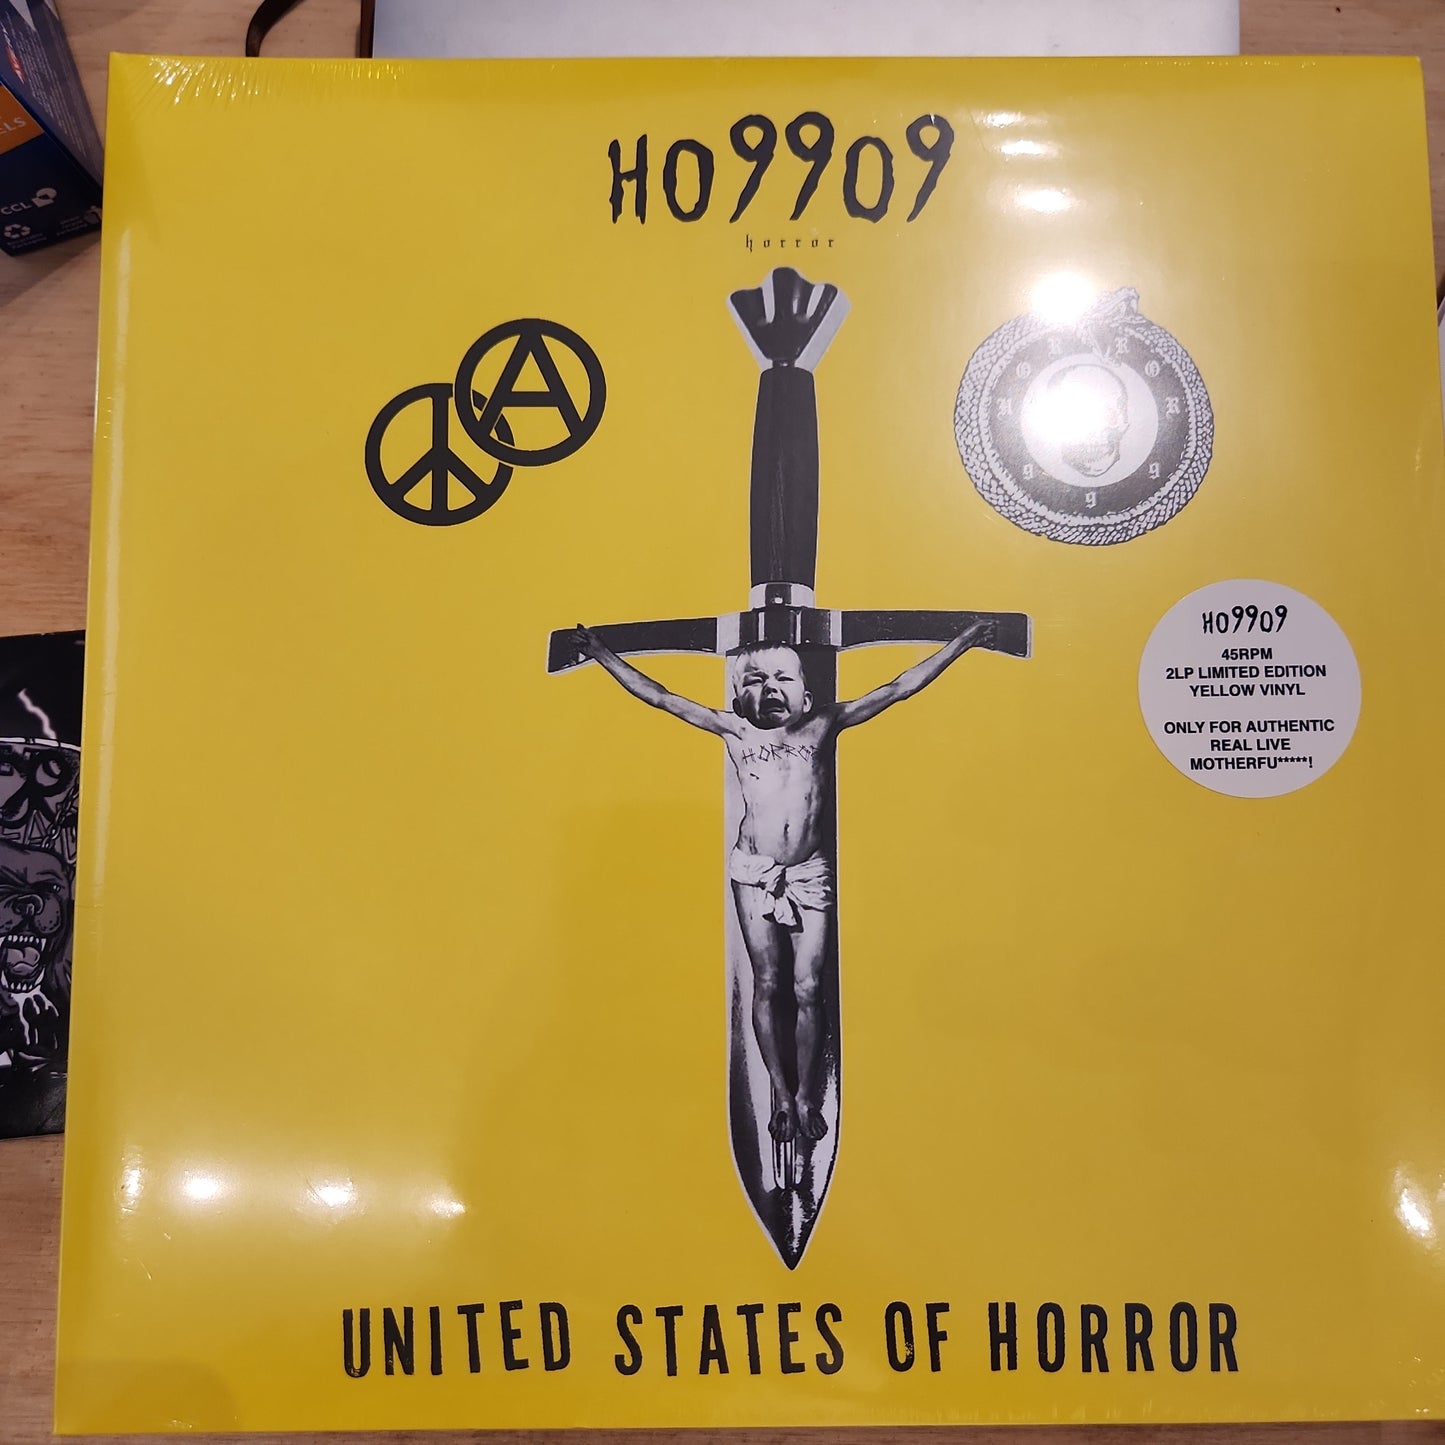 Ho99o9 - United States of Horror - Limited Yellow Double Vinyl LP